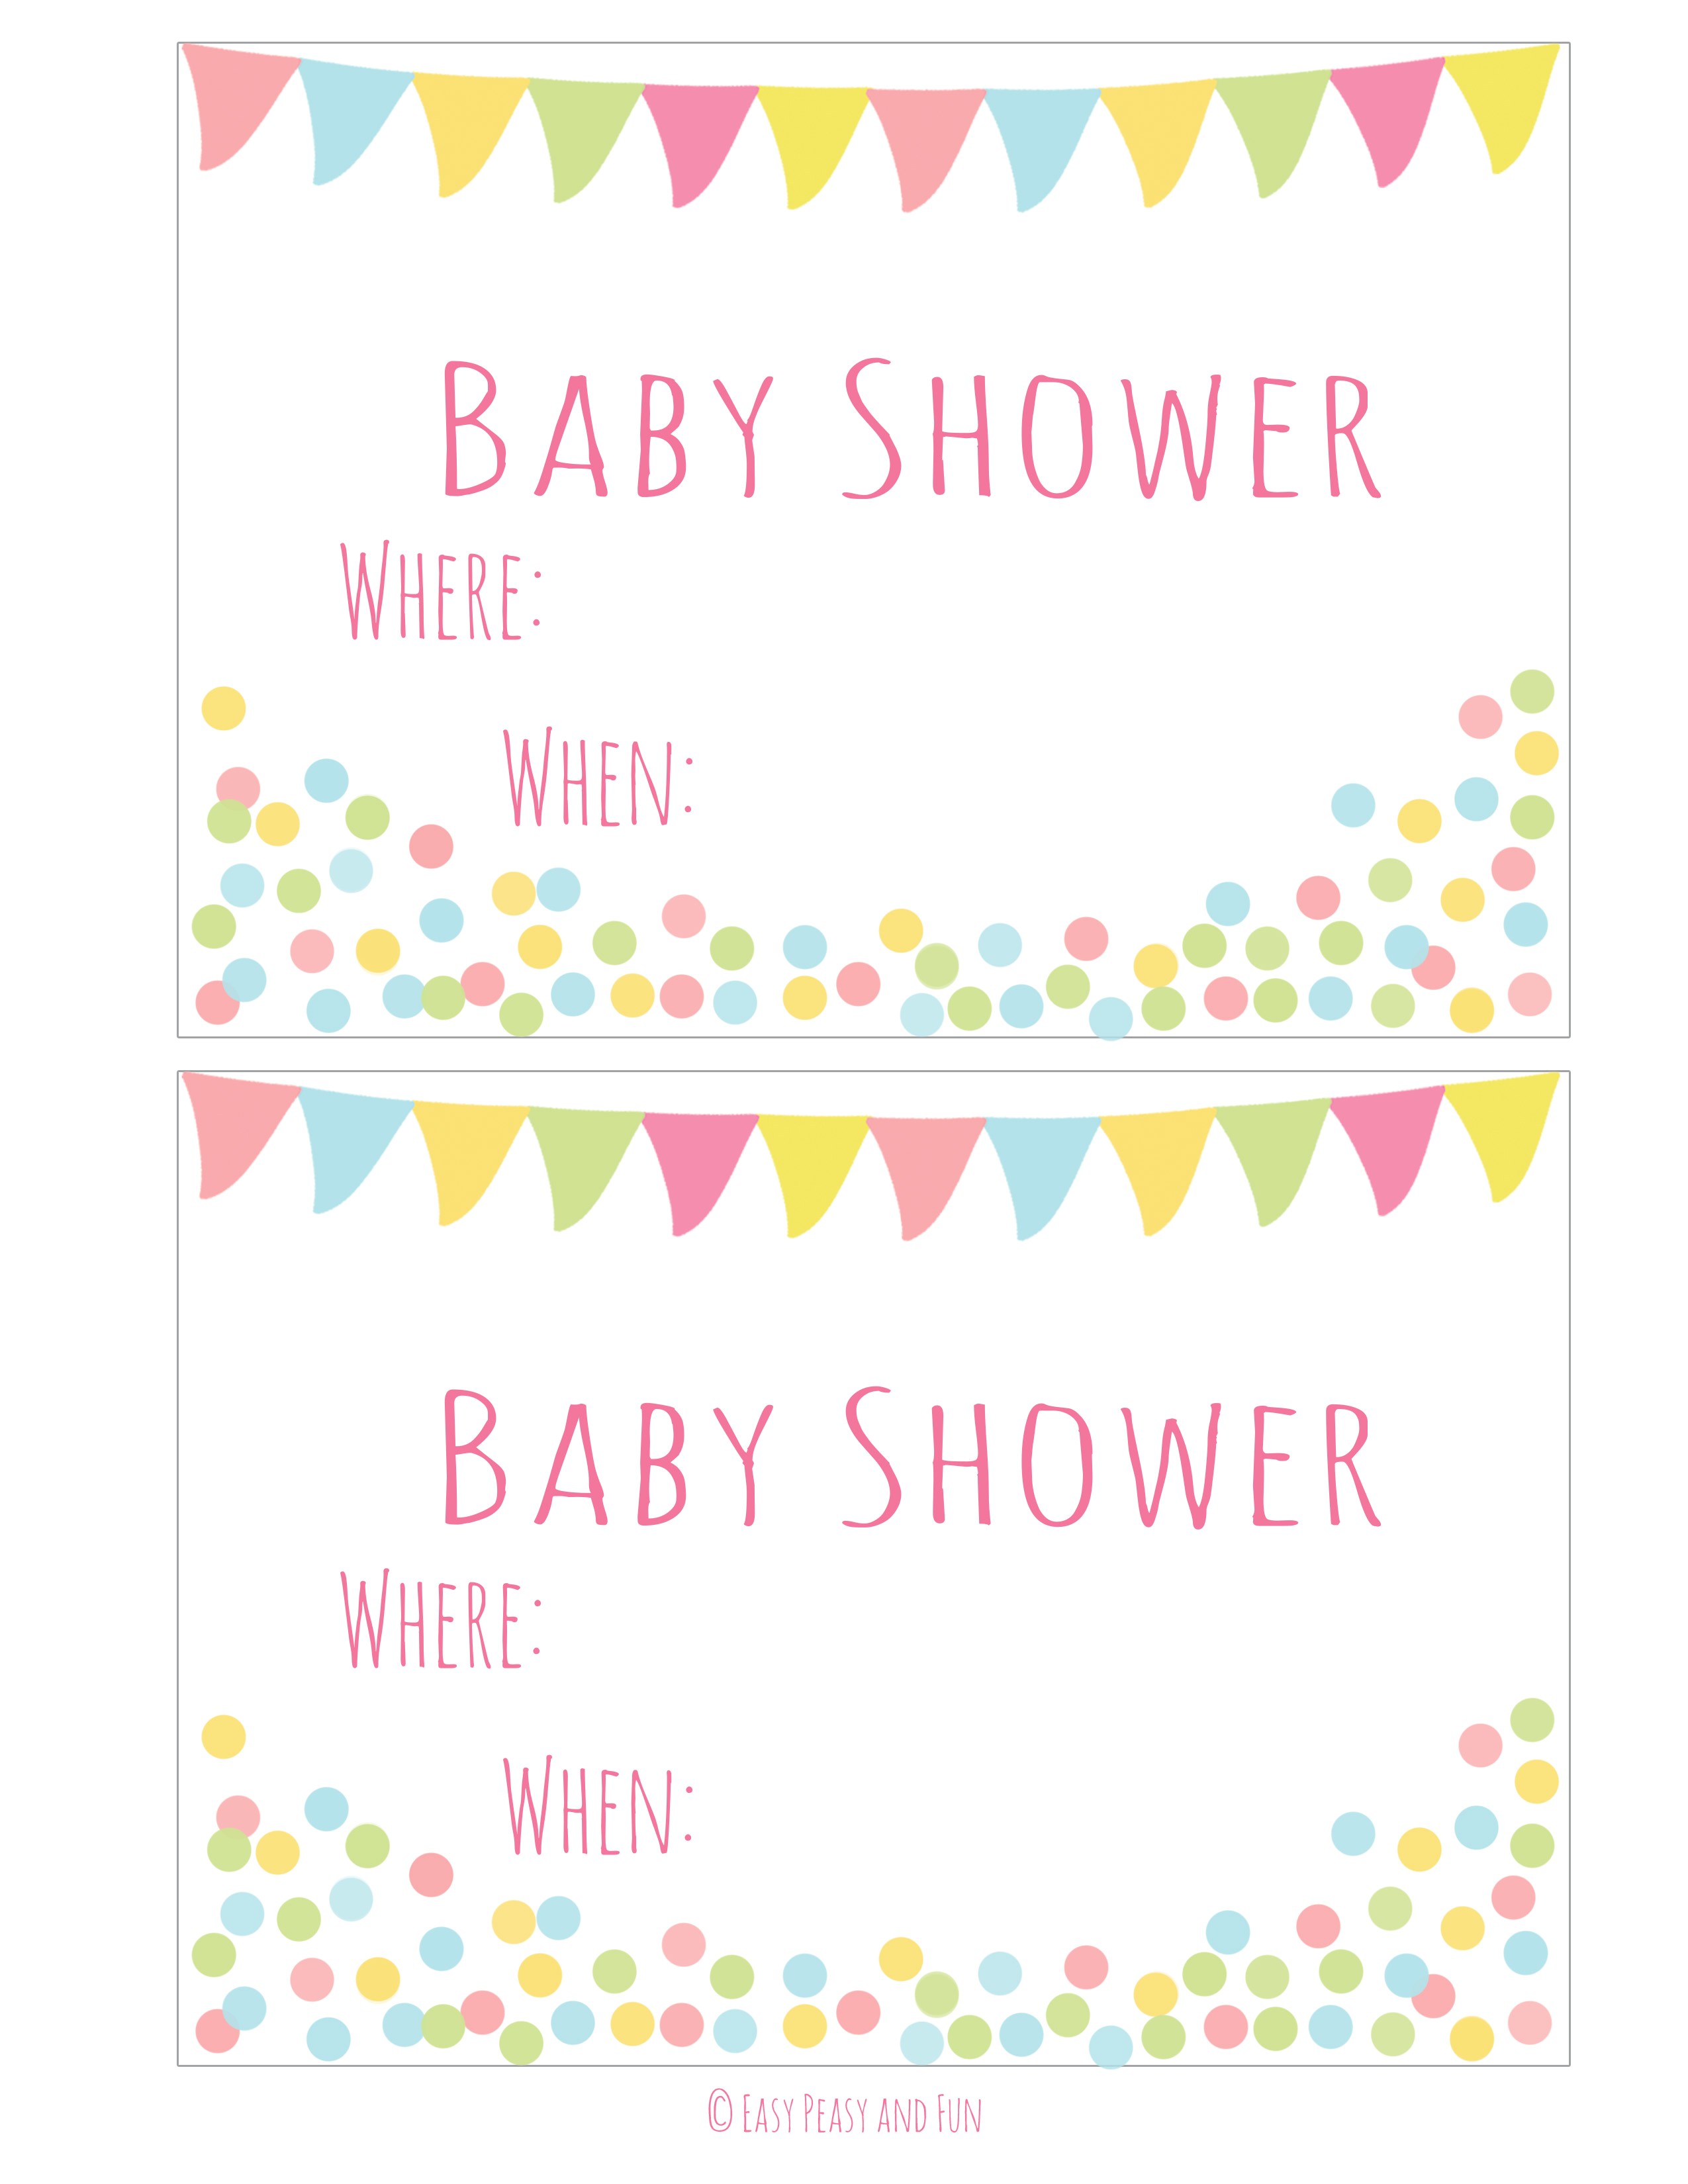 Baby Shower Invitation Cards for Girls Free Printable Baby Shower Invitations for Girls